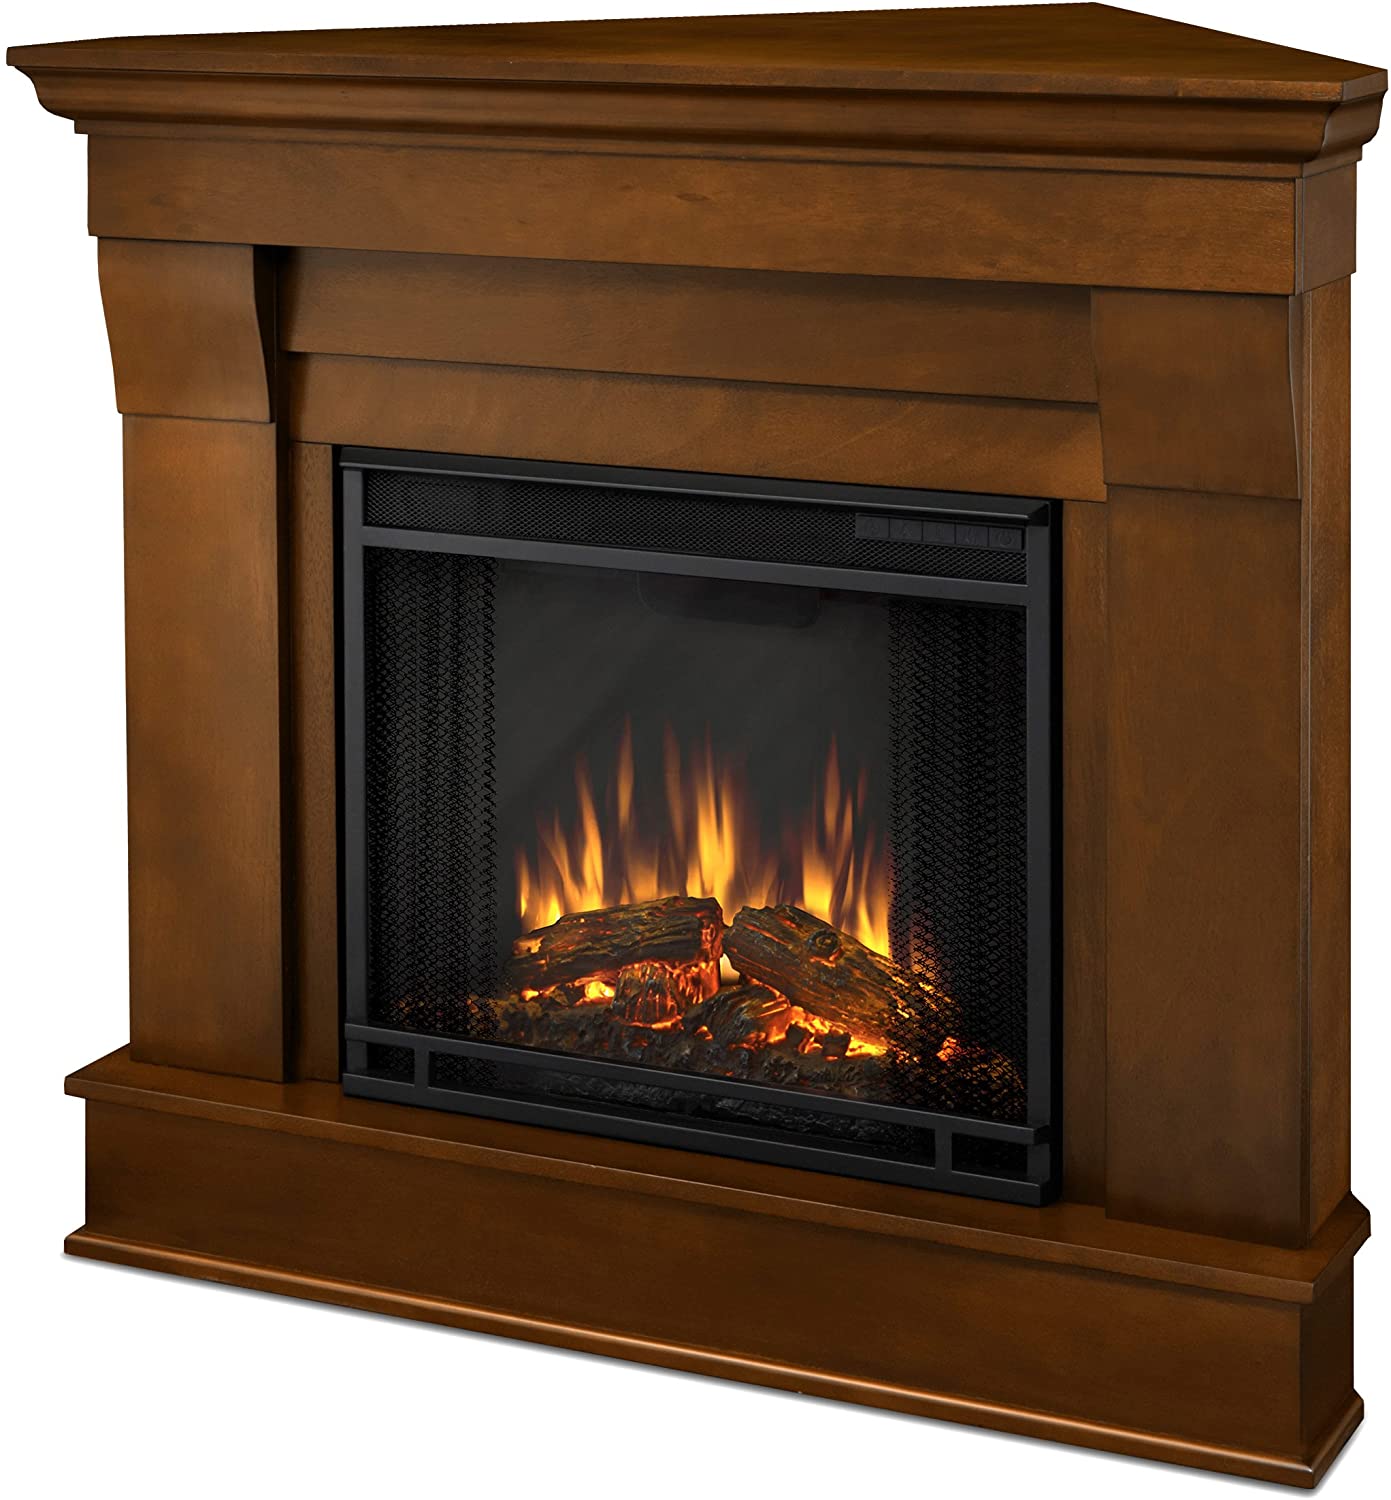 Stone Fireplace with Wood Mantel Lovely Real Flame 5950e Chateau Corner Electric Fireplace Small Espresso